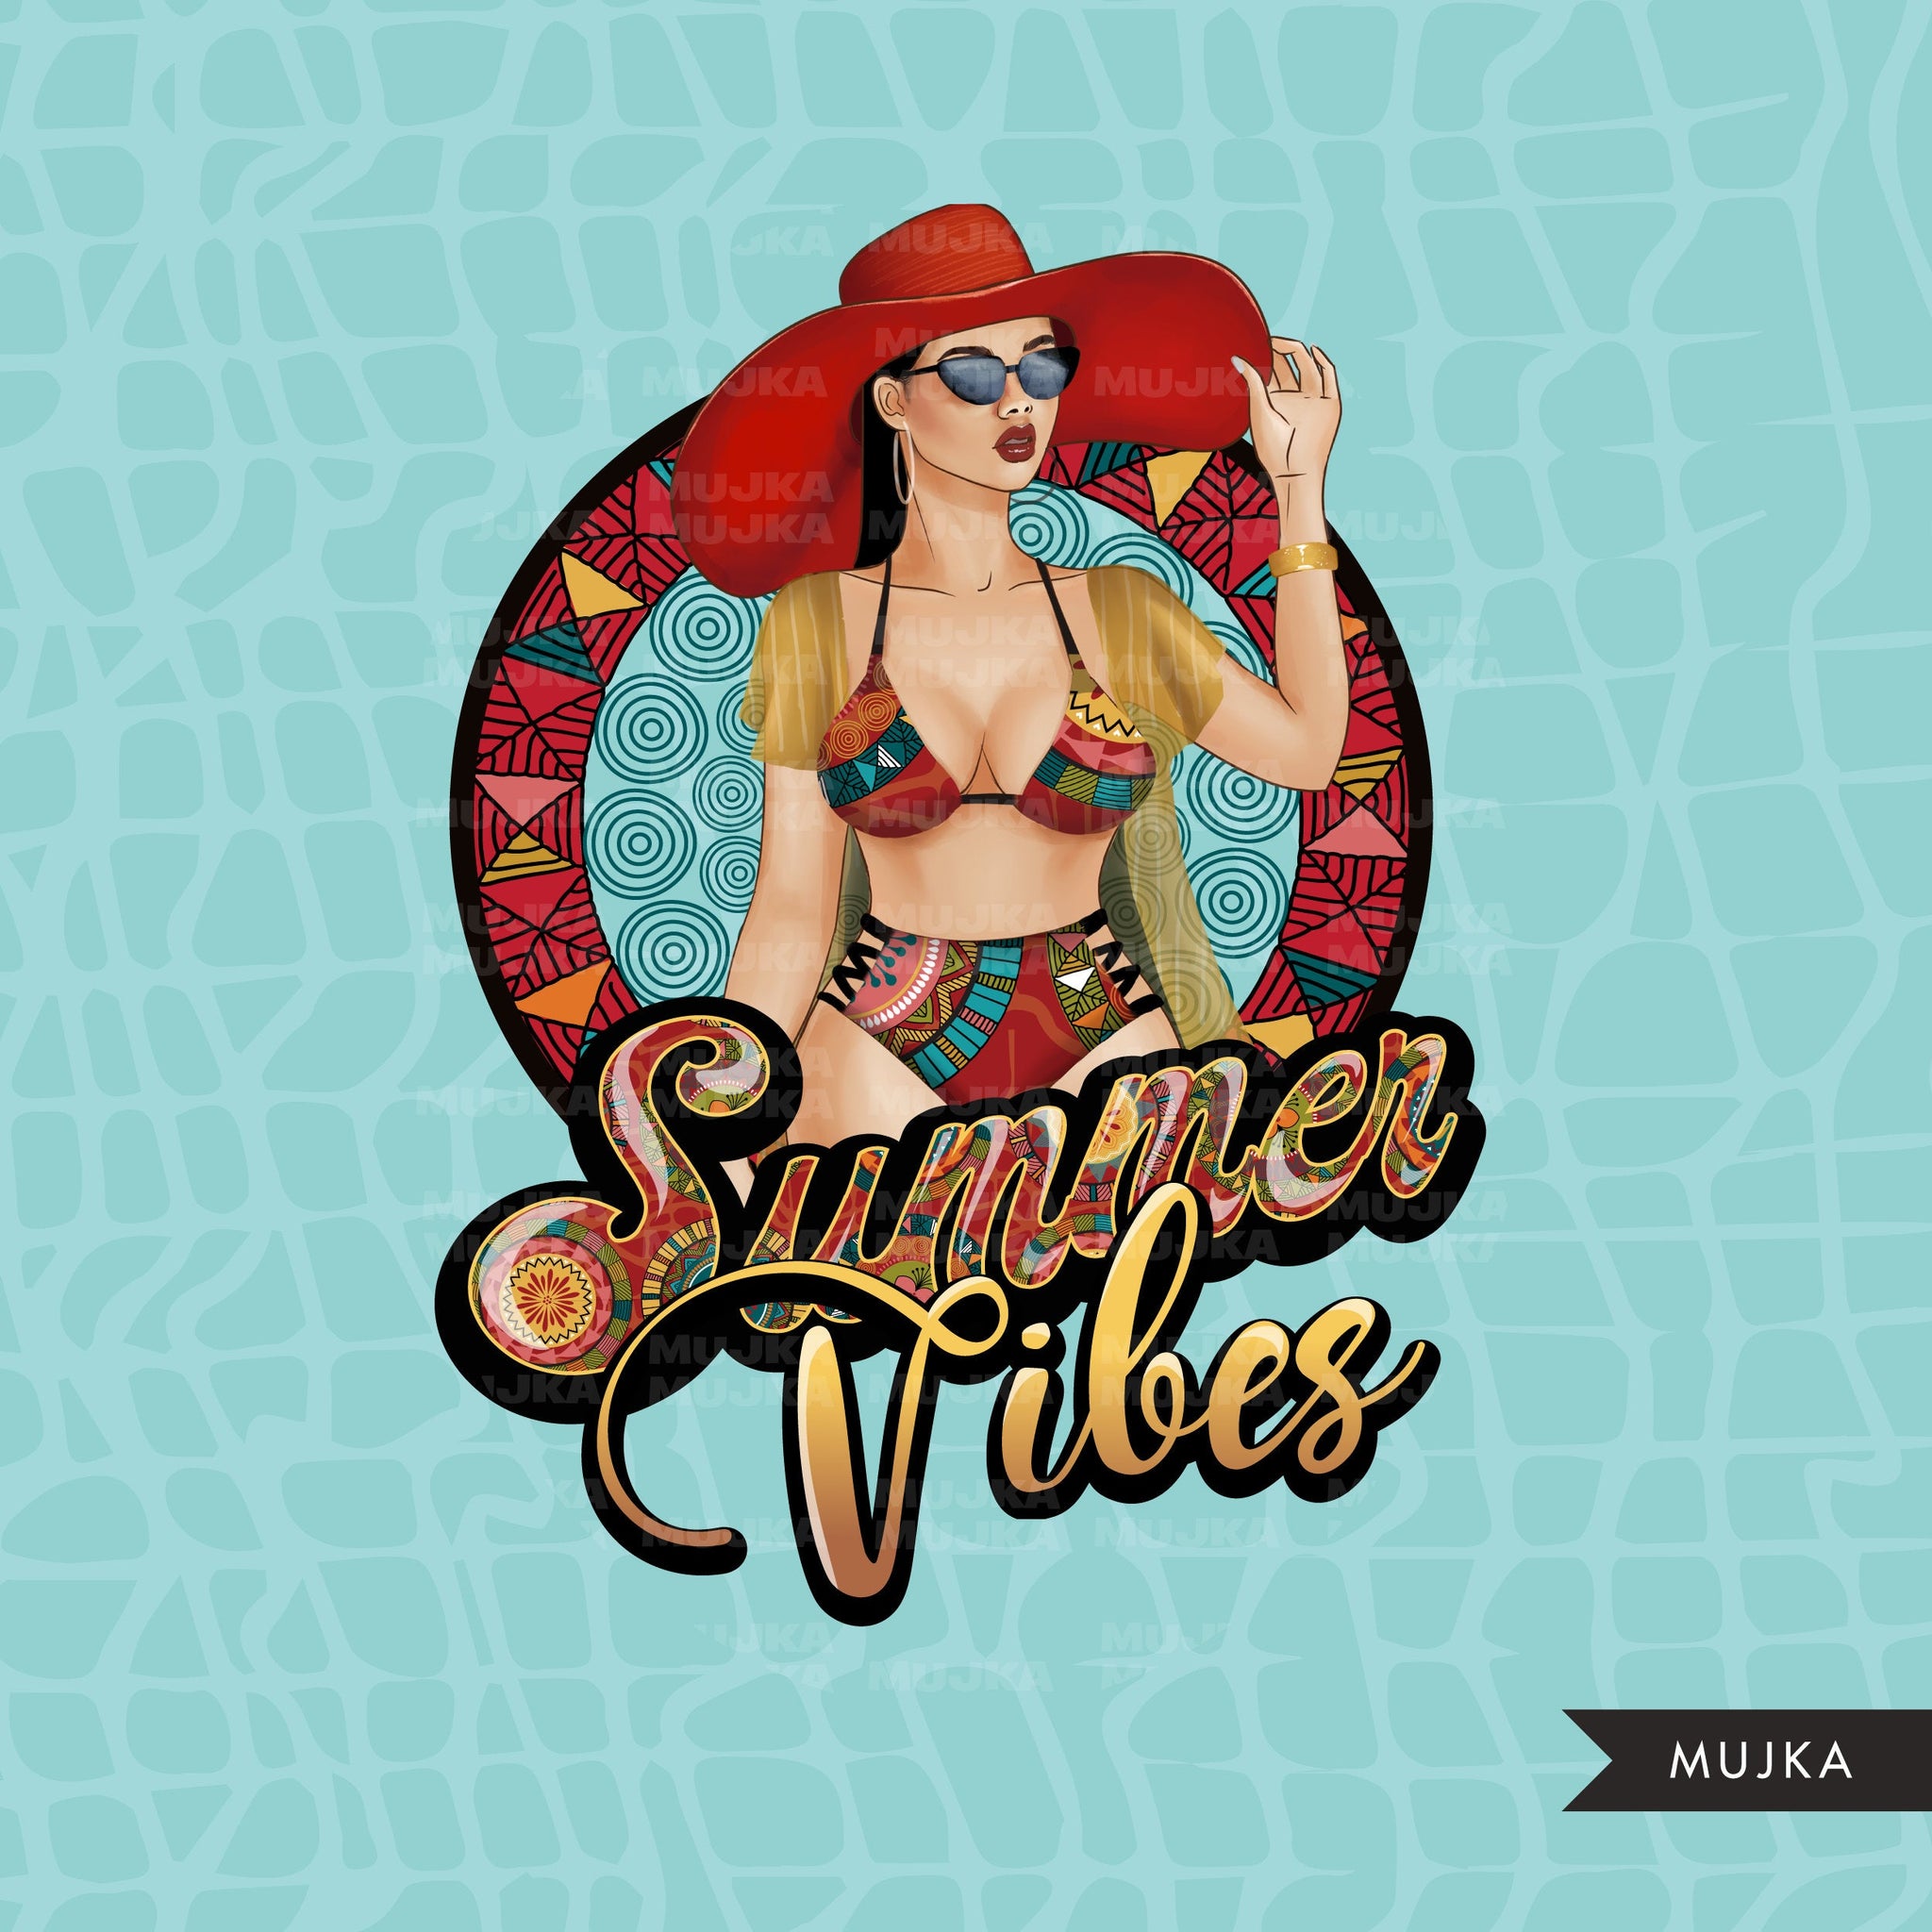 Summer Vibes PNG, Sublimation designs, Summer clipart, vacation digital papers, Beach Girls, Fashion girl clipart, summer girls graphics